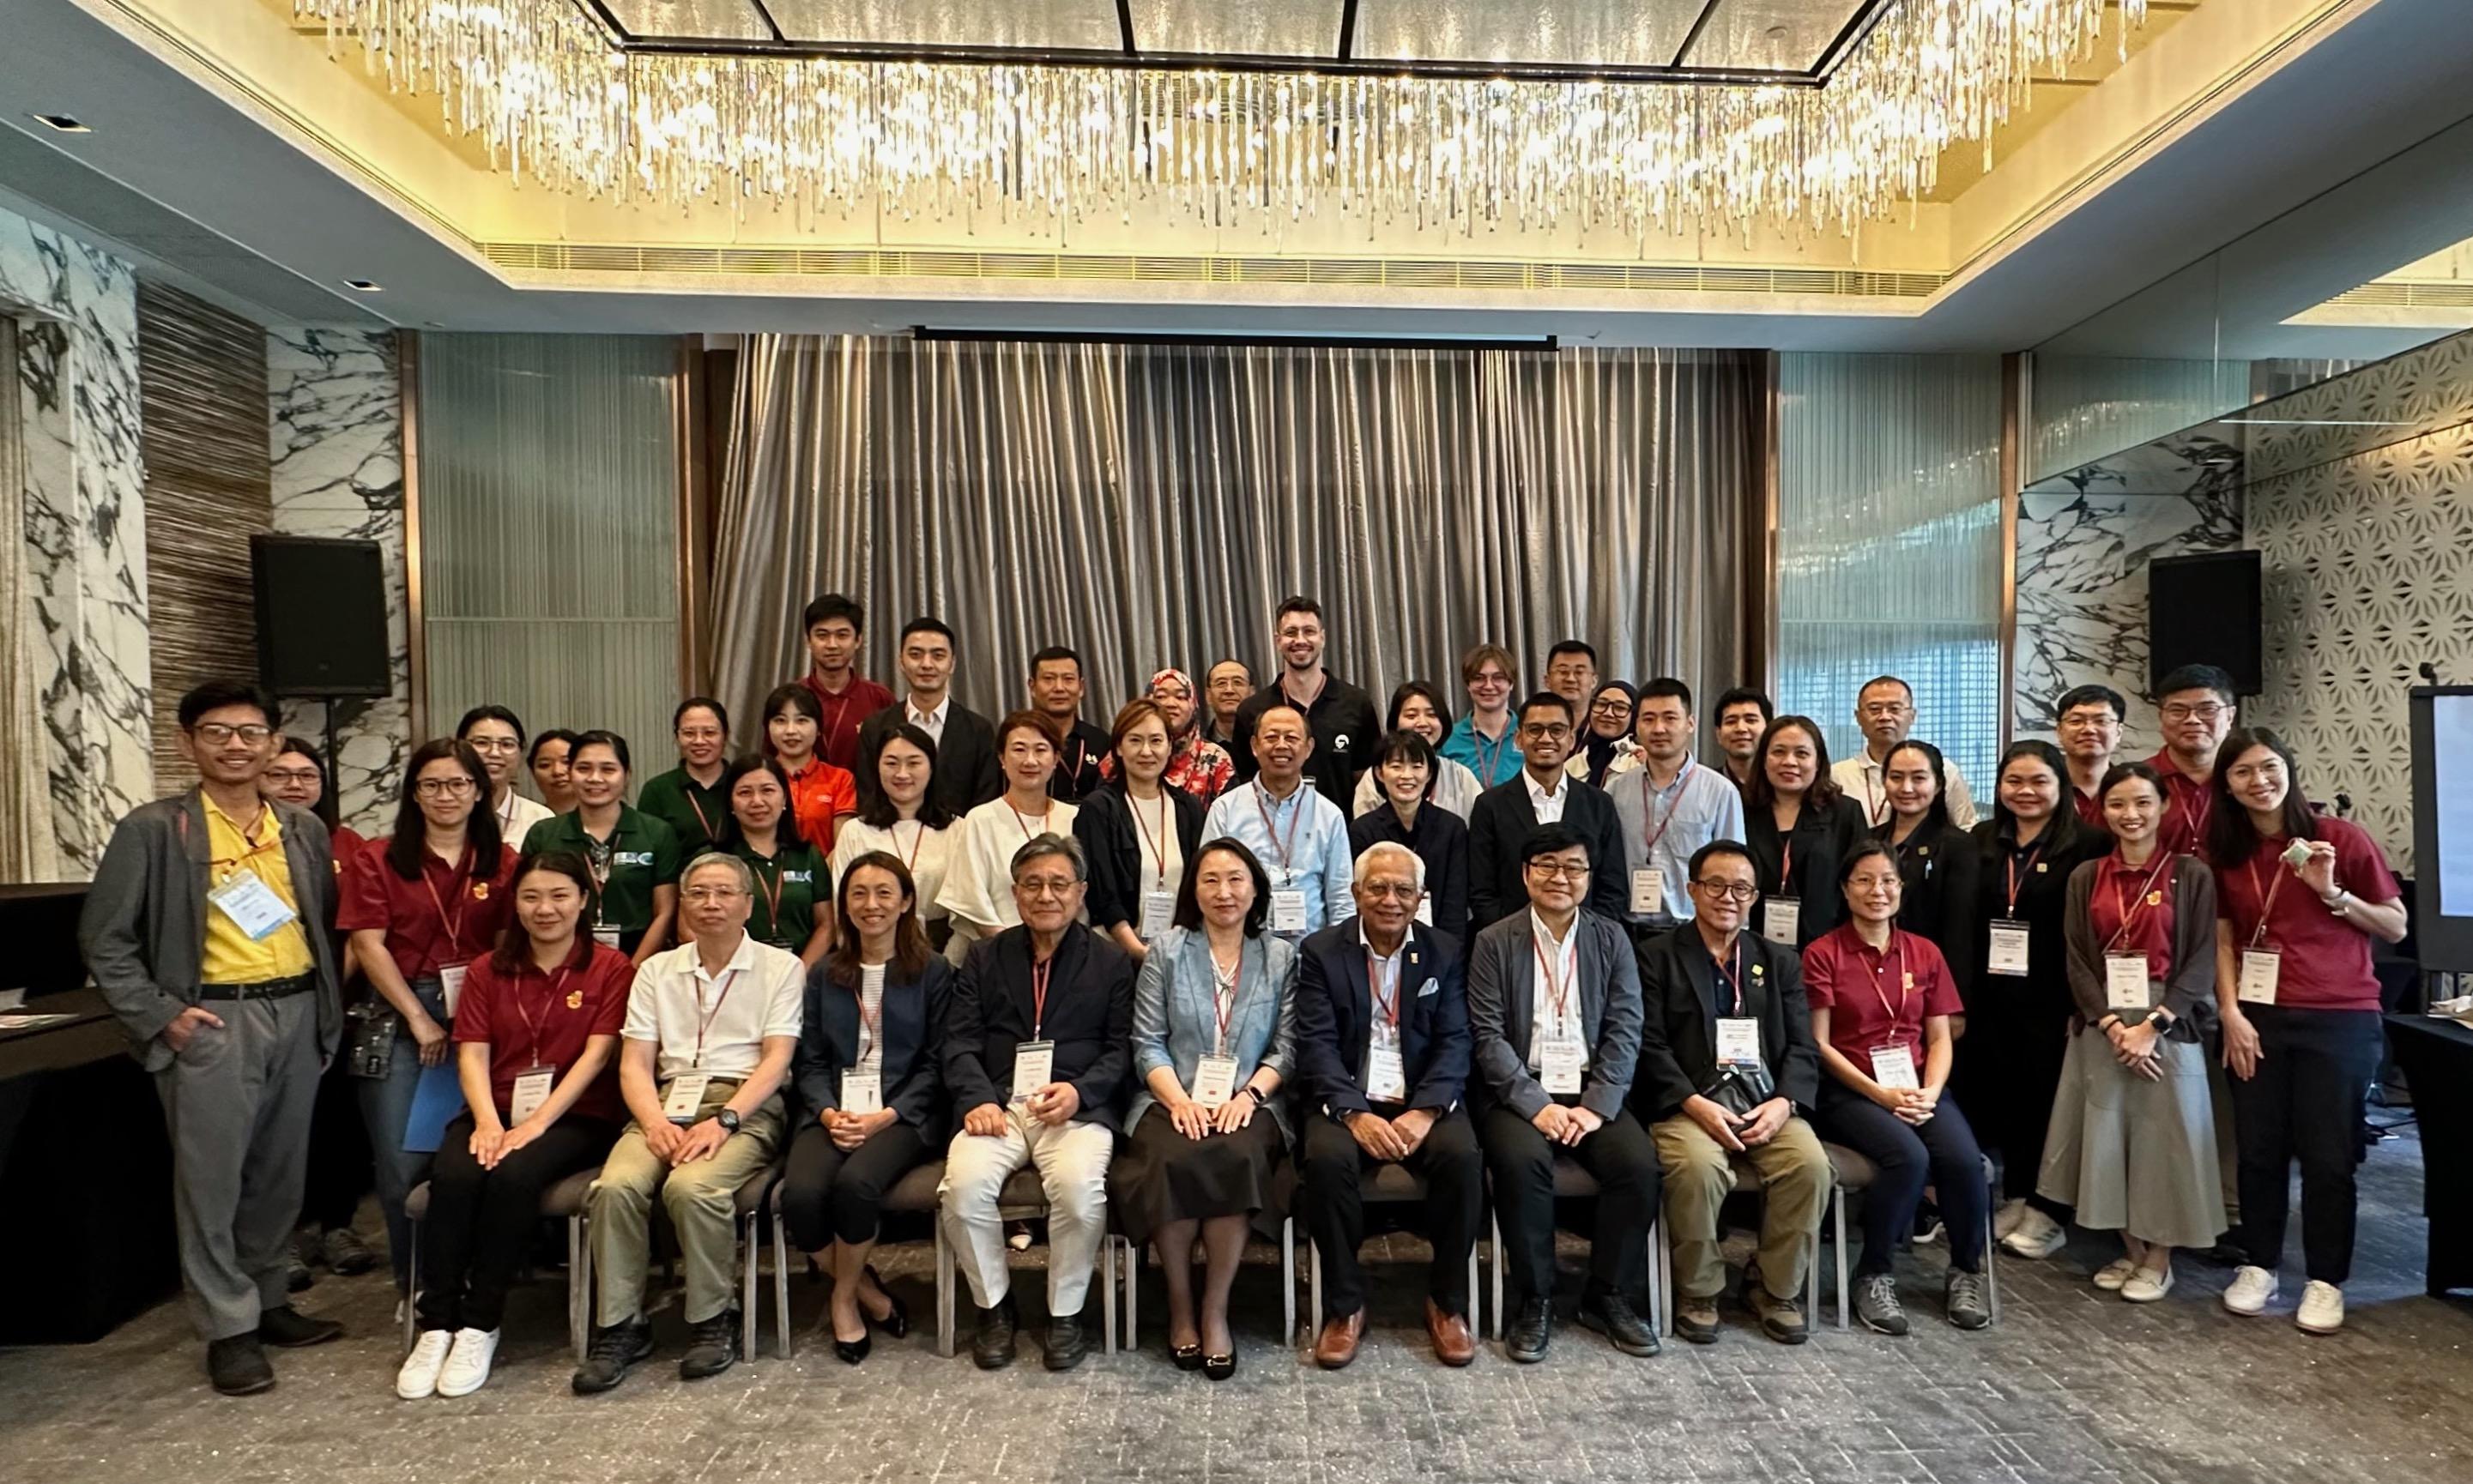 The four-day Asia Pacific Geoparks Network Geopark Development Forum opened today (May 14) in Hong Kong. Representatives from 22 geoparks in the Asia-Pacific region have gathered to exchange experiences, challenges and good practices in managing geoparks.